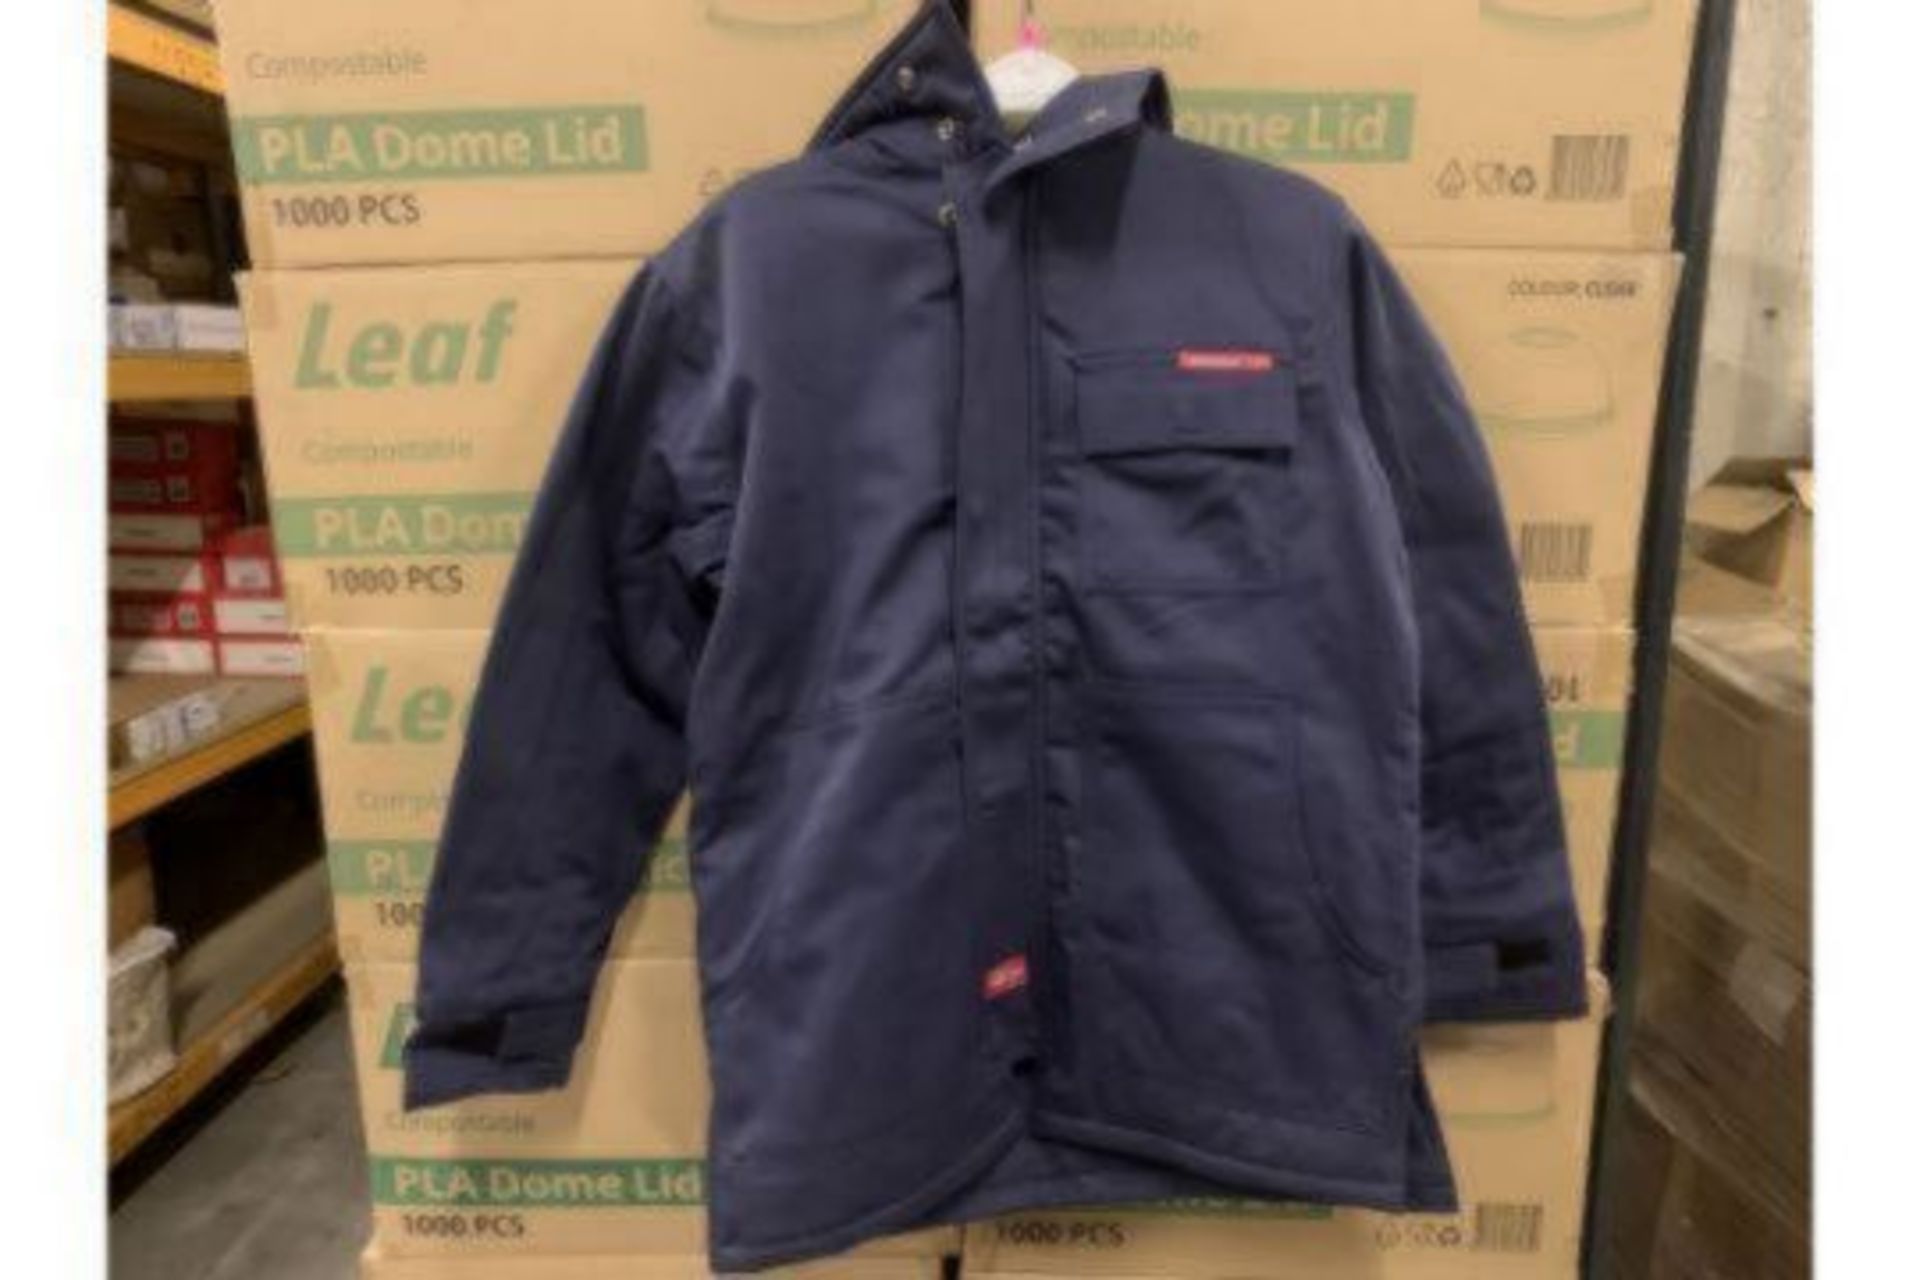 3 X BRAND NEW DICKIES 10OZ INSULATED PARKA JACKETS NAVY SIZE SMALL RRP £190 EACH S1